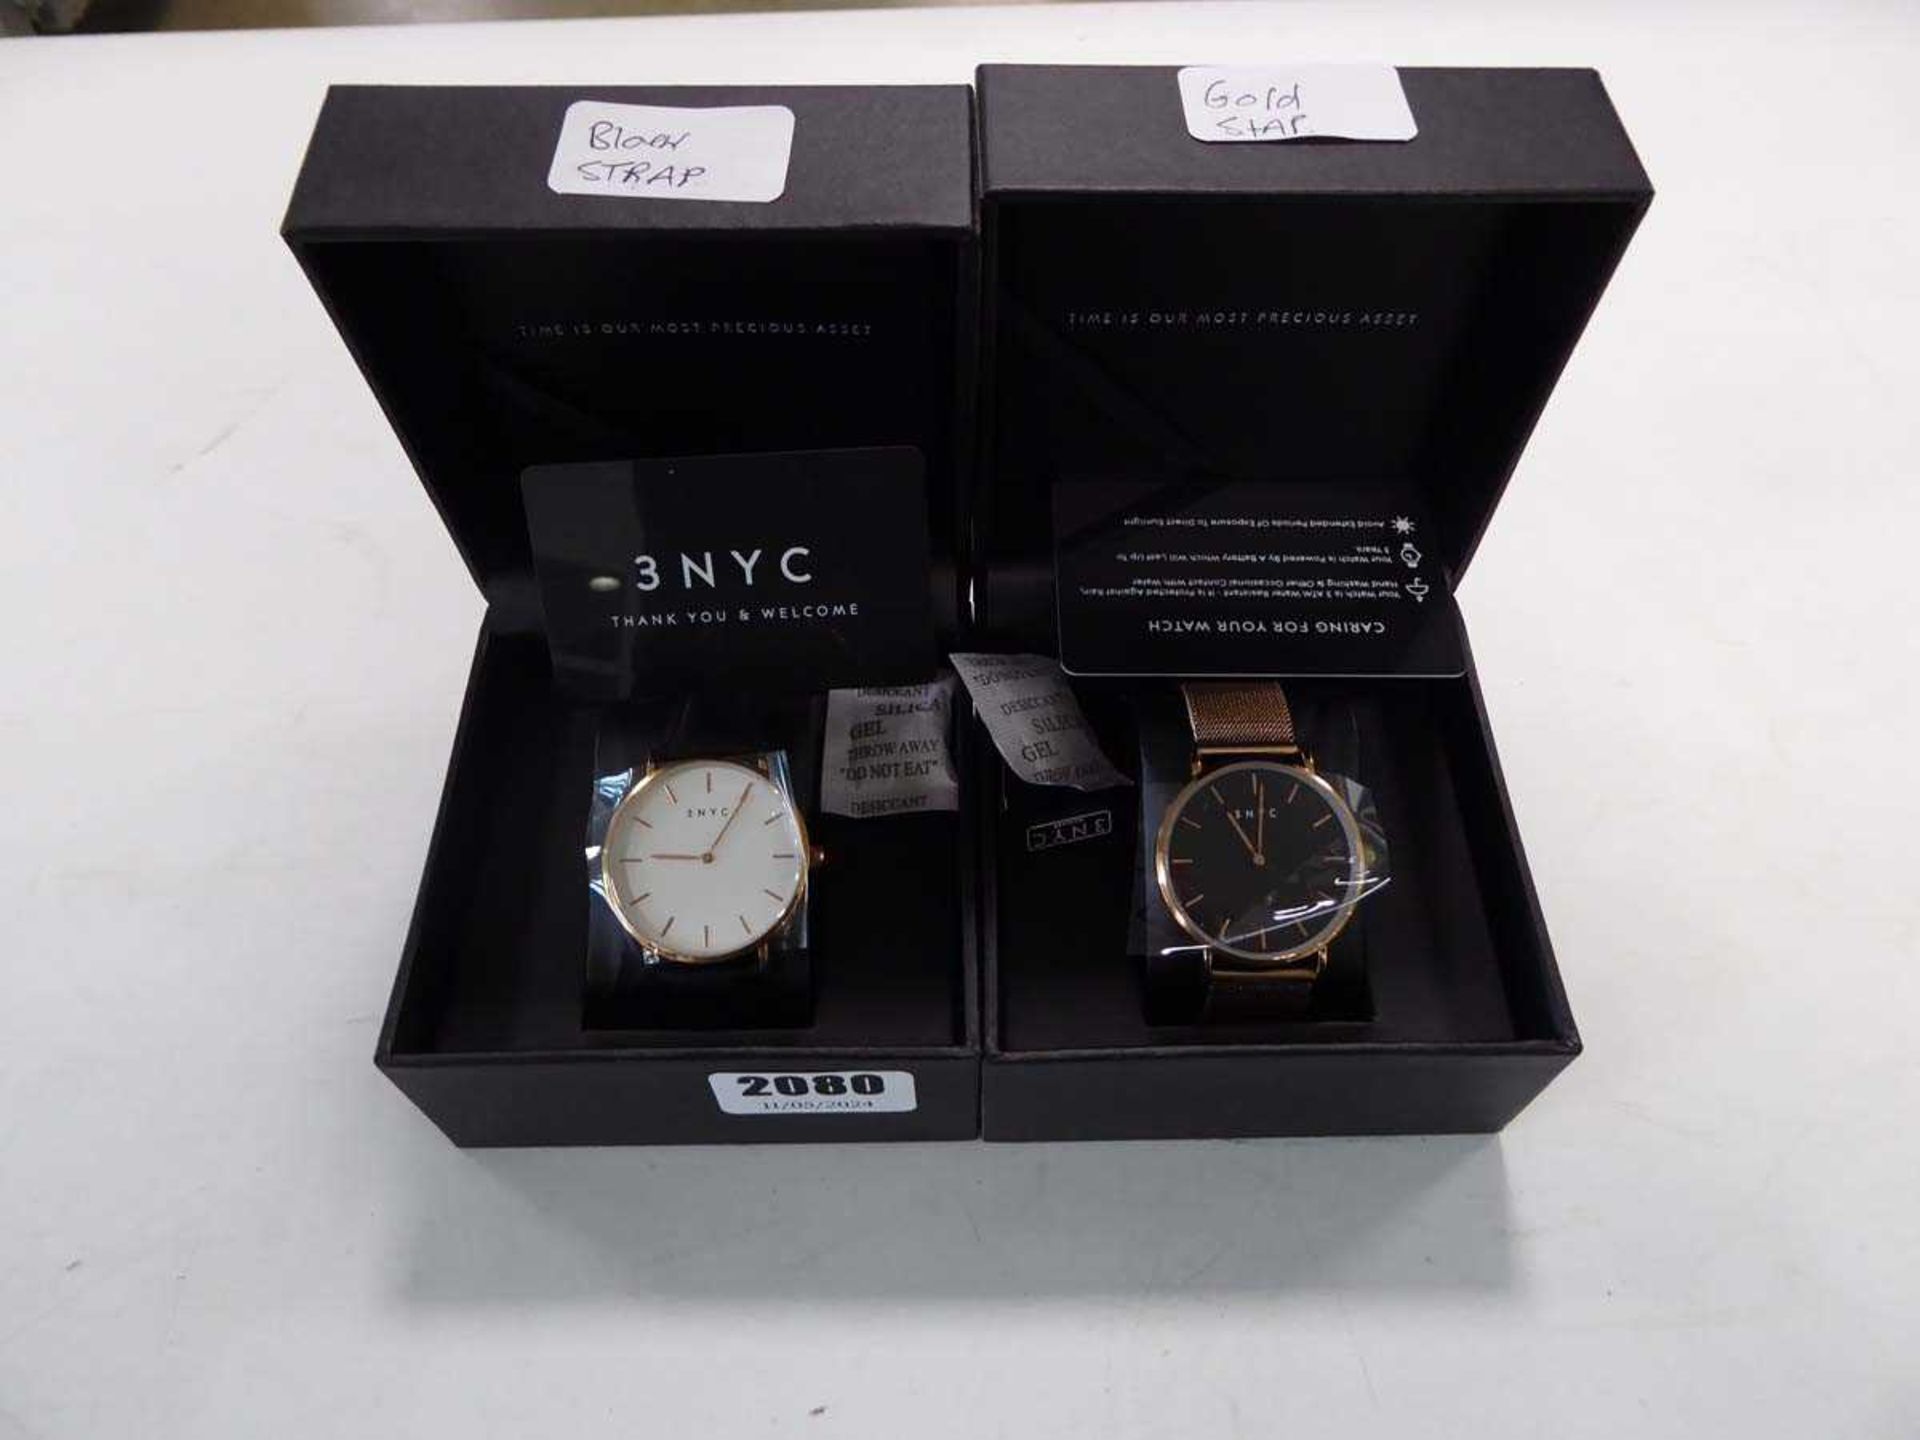 2x 3 NYC wristwatches, 1 with black strap and white face and 1 with golden strap and black face